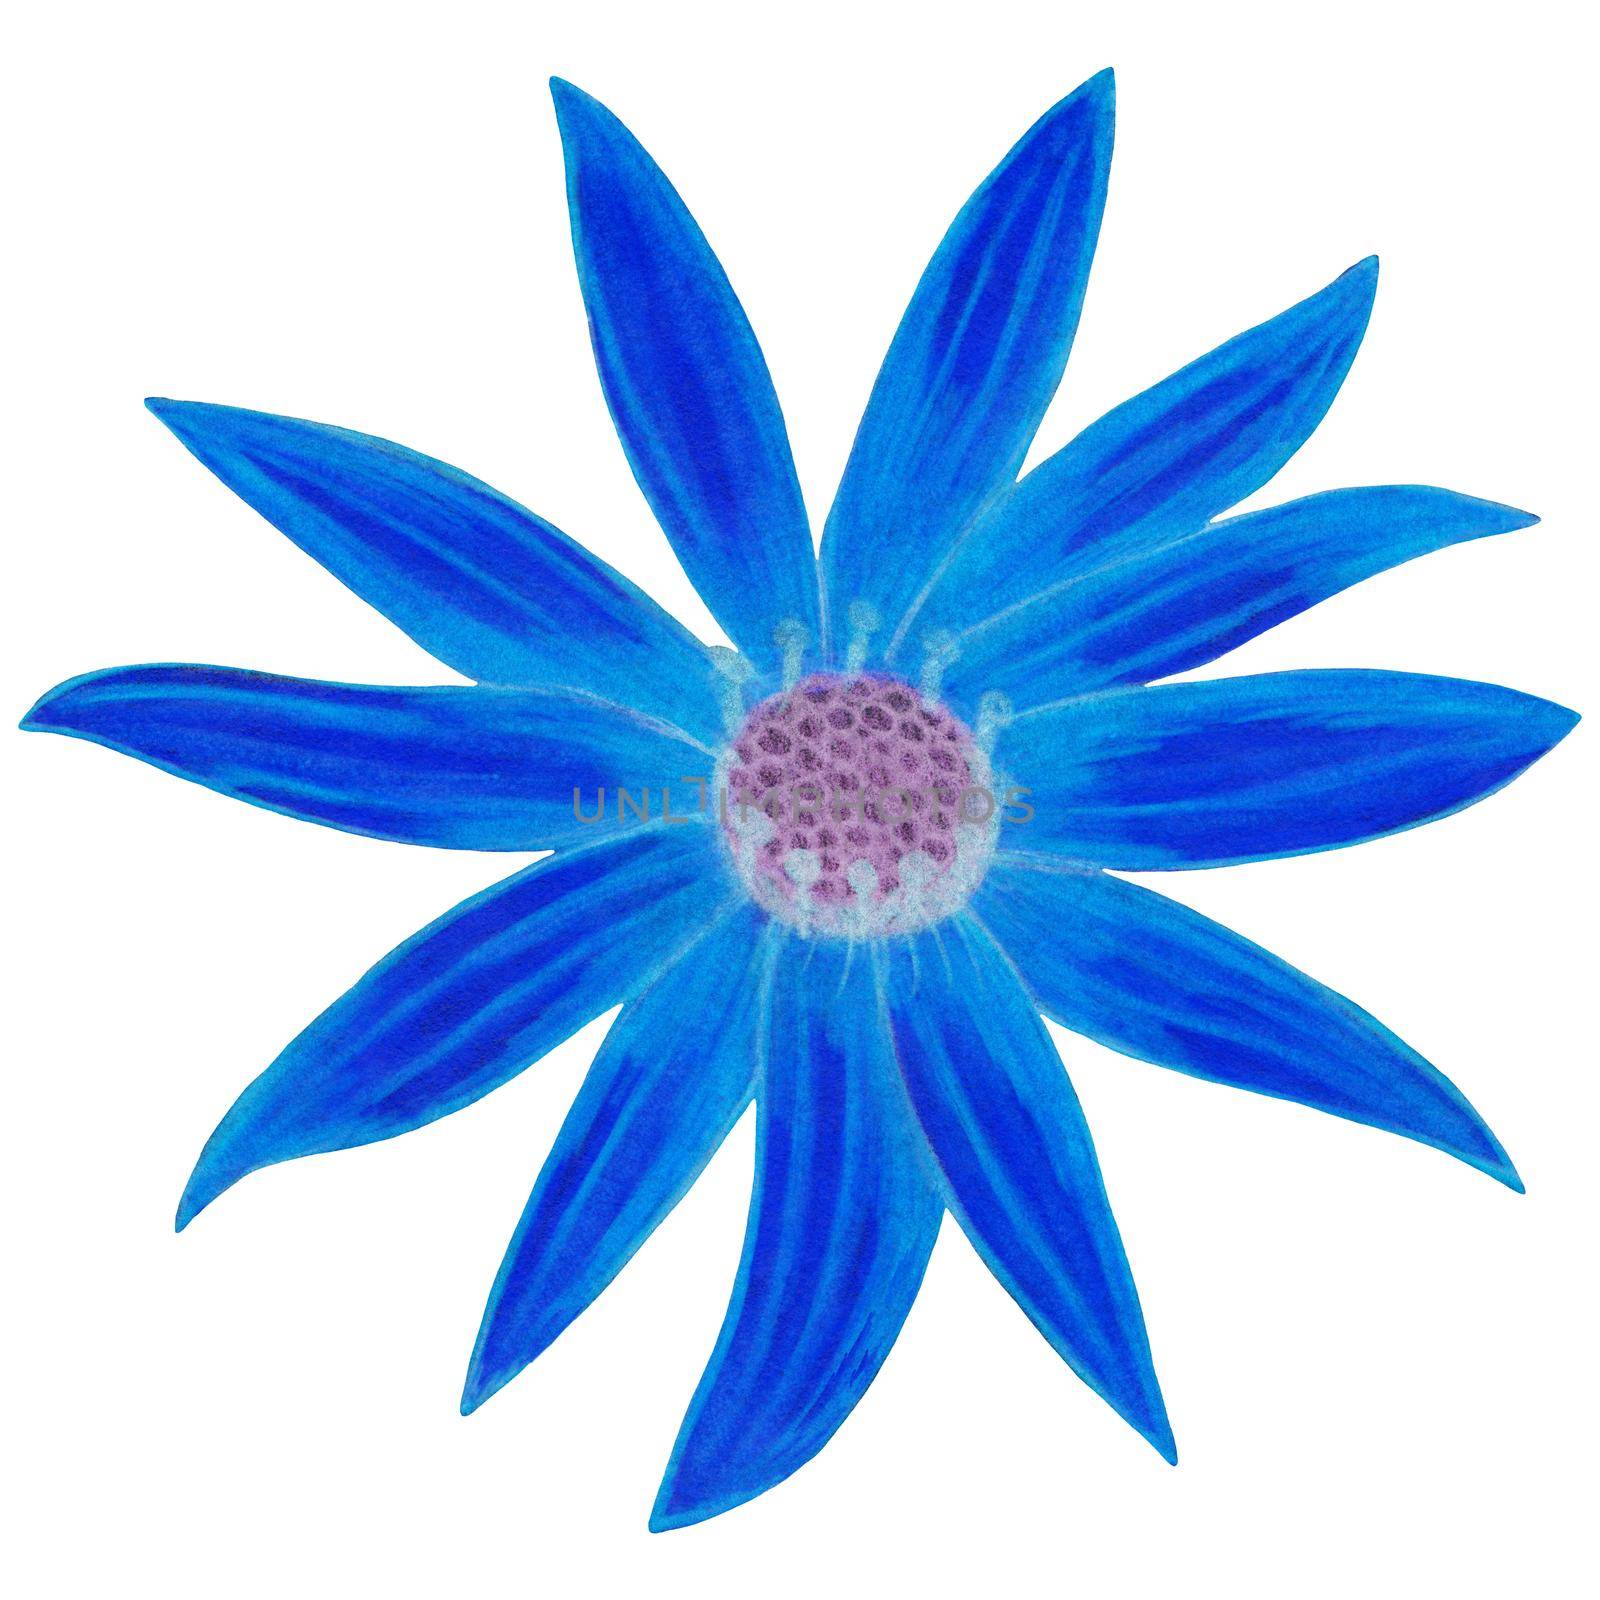 Blue Topinambur Isolated on White Background. Jerusalem Artichoke Flower Element Drawn by Colored Pencil.